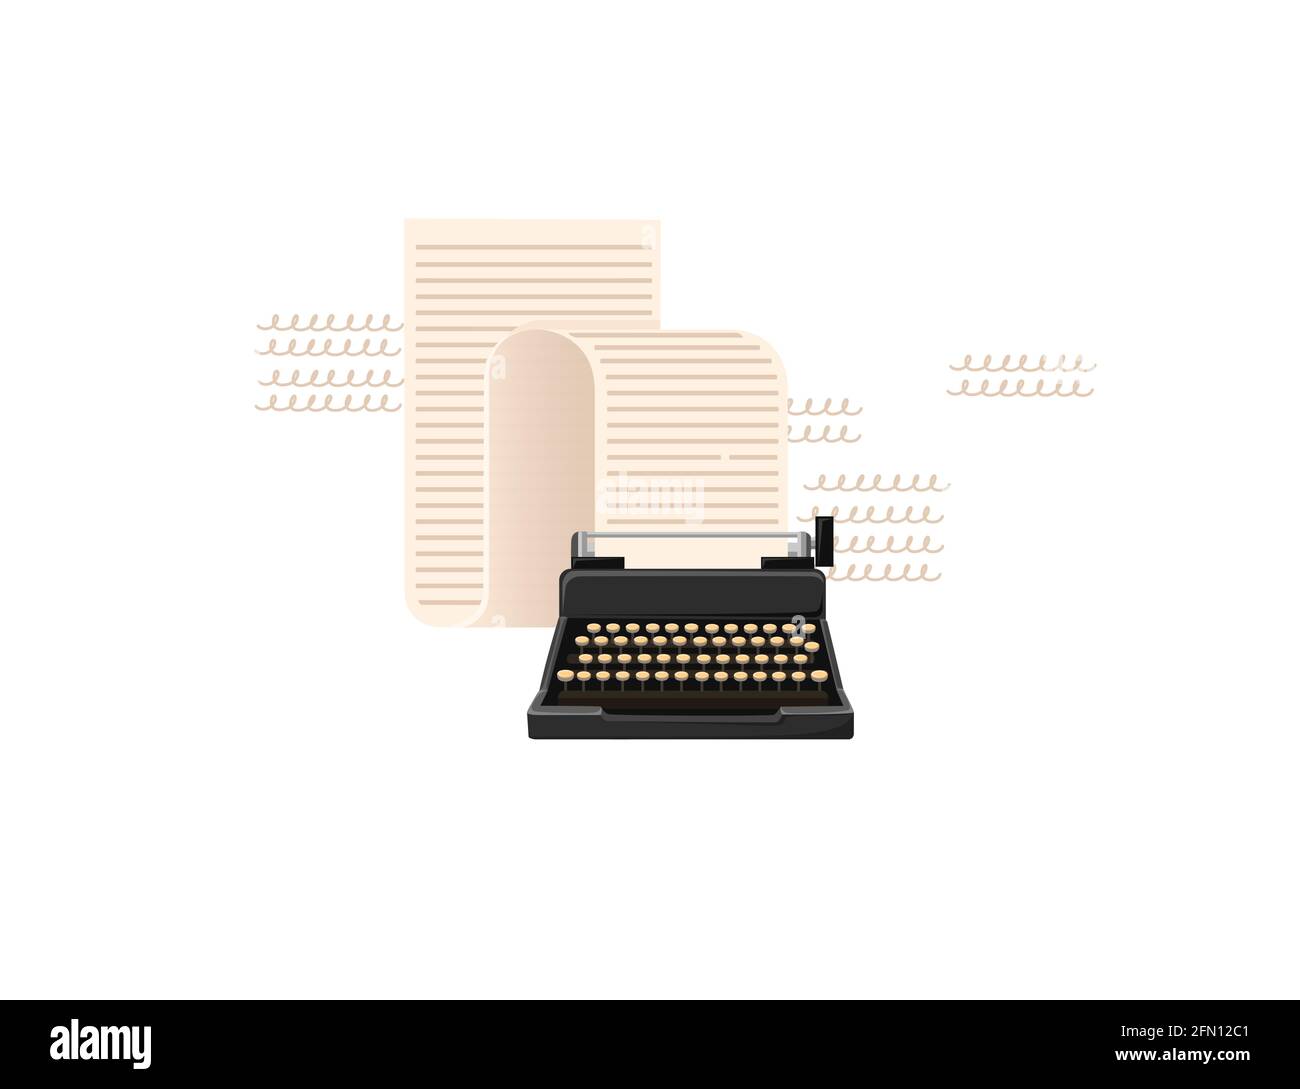 Retro style black color typewriter machine with long paper scroll vector illustration on white background Stock Vector